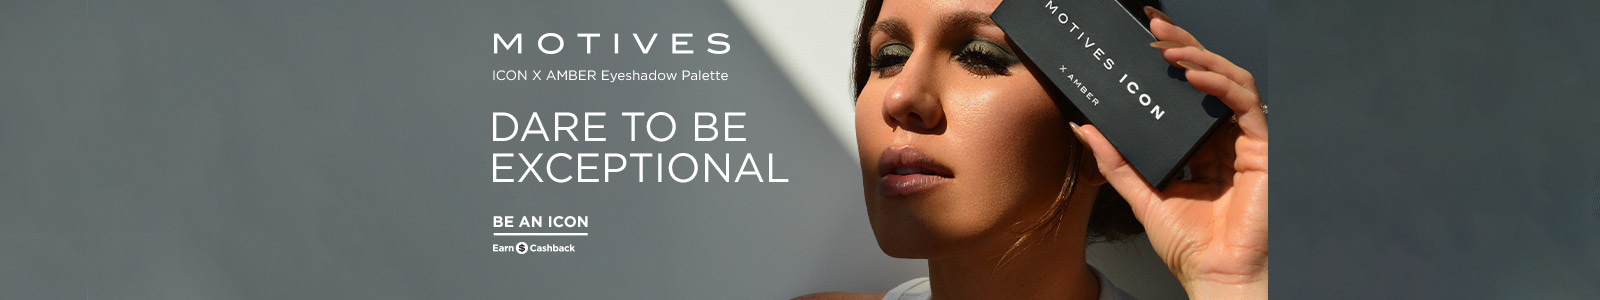 Motives ICON X AMBER Eyeshadow Palette Dare to be Exceptional Be an Icon